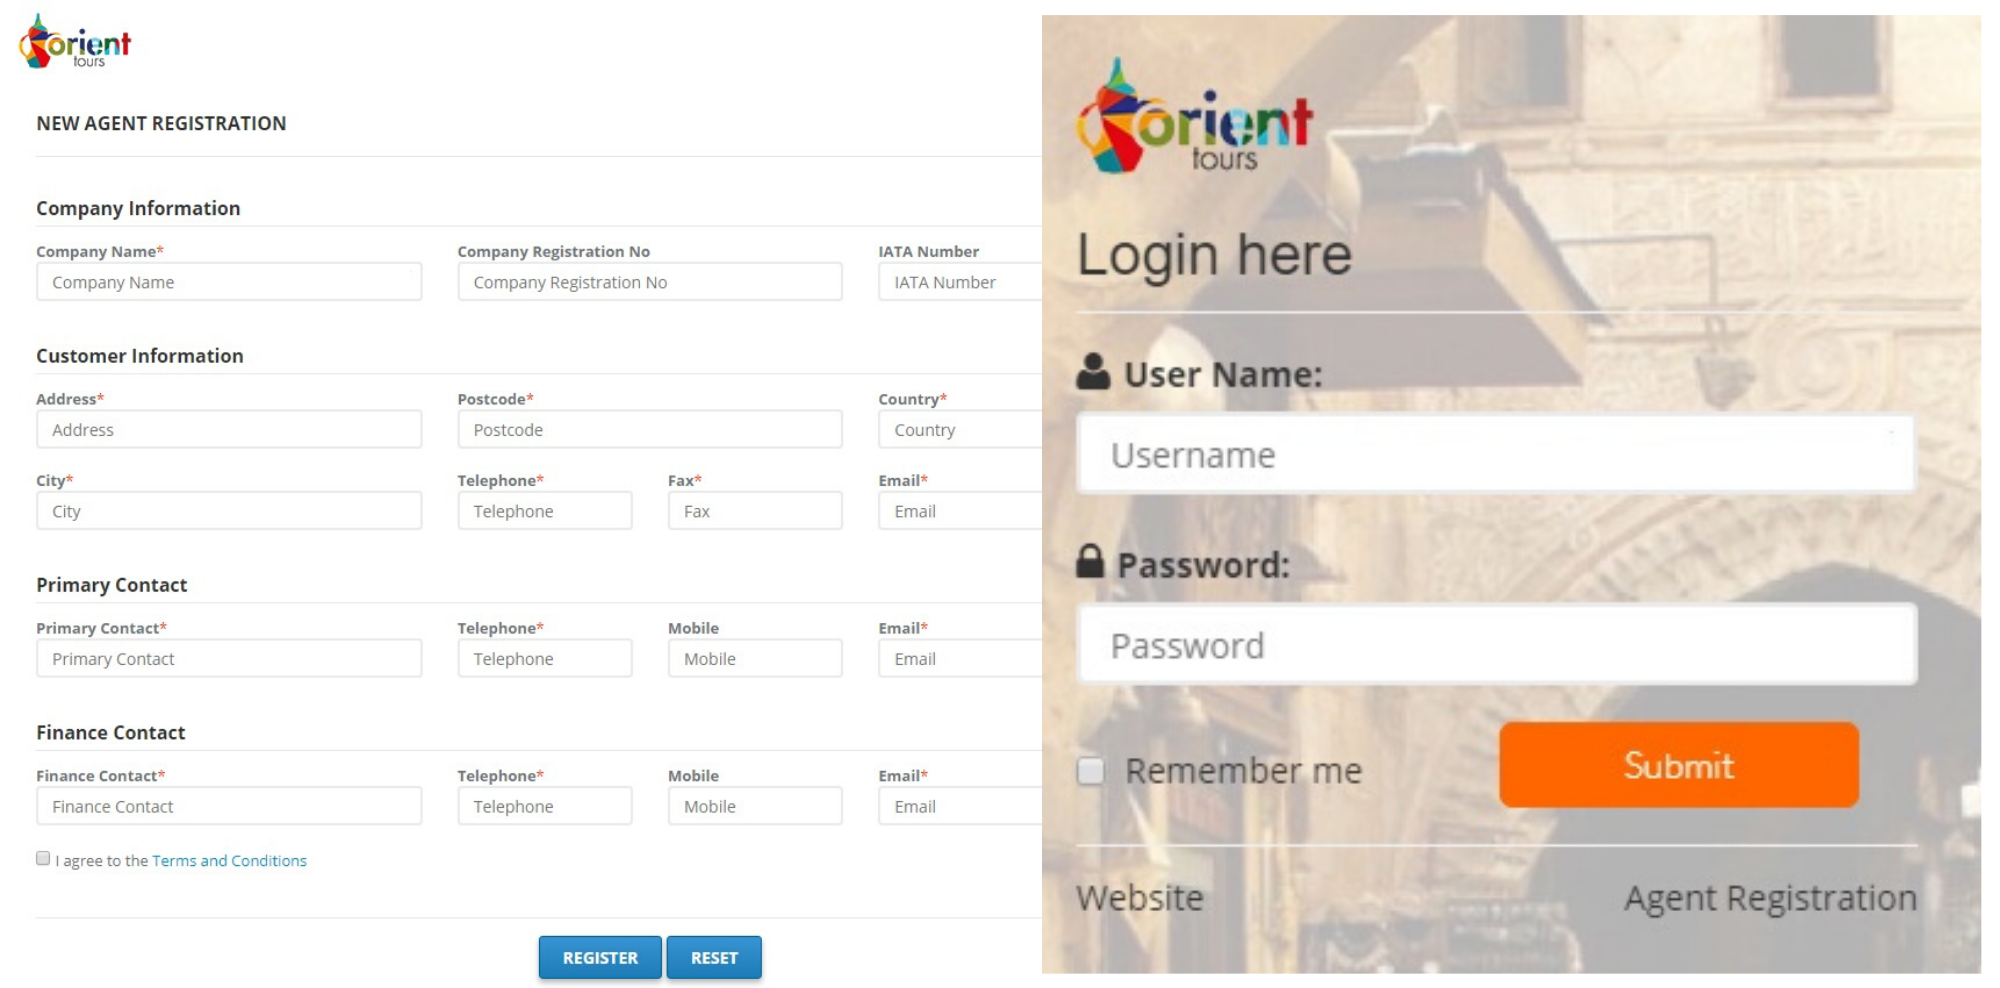 Login and registration forms for travel agencies at Orient Tours